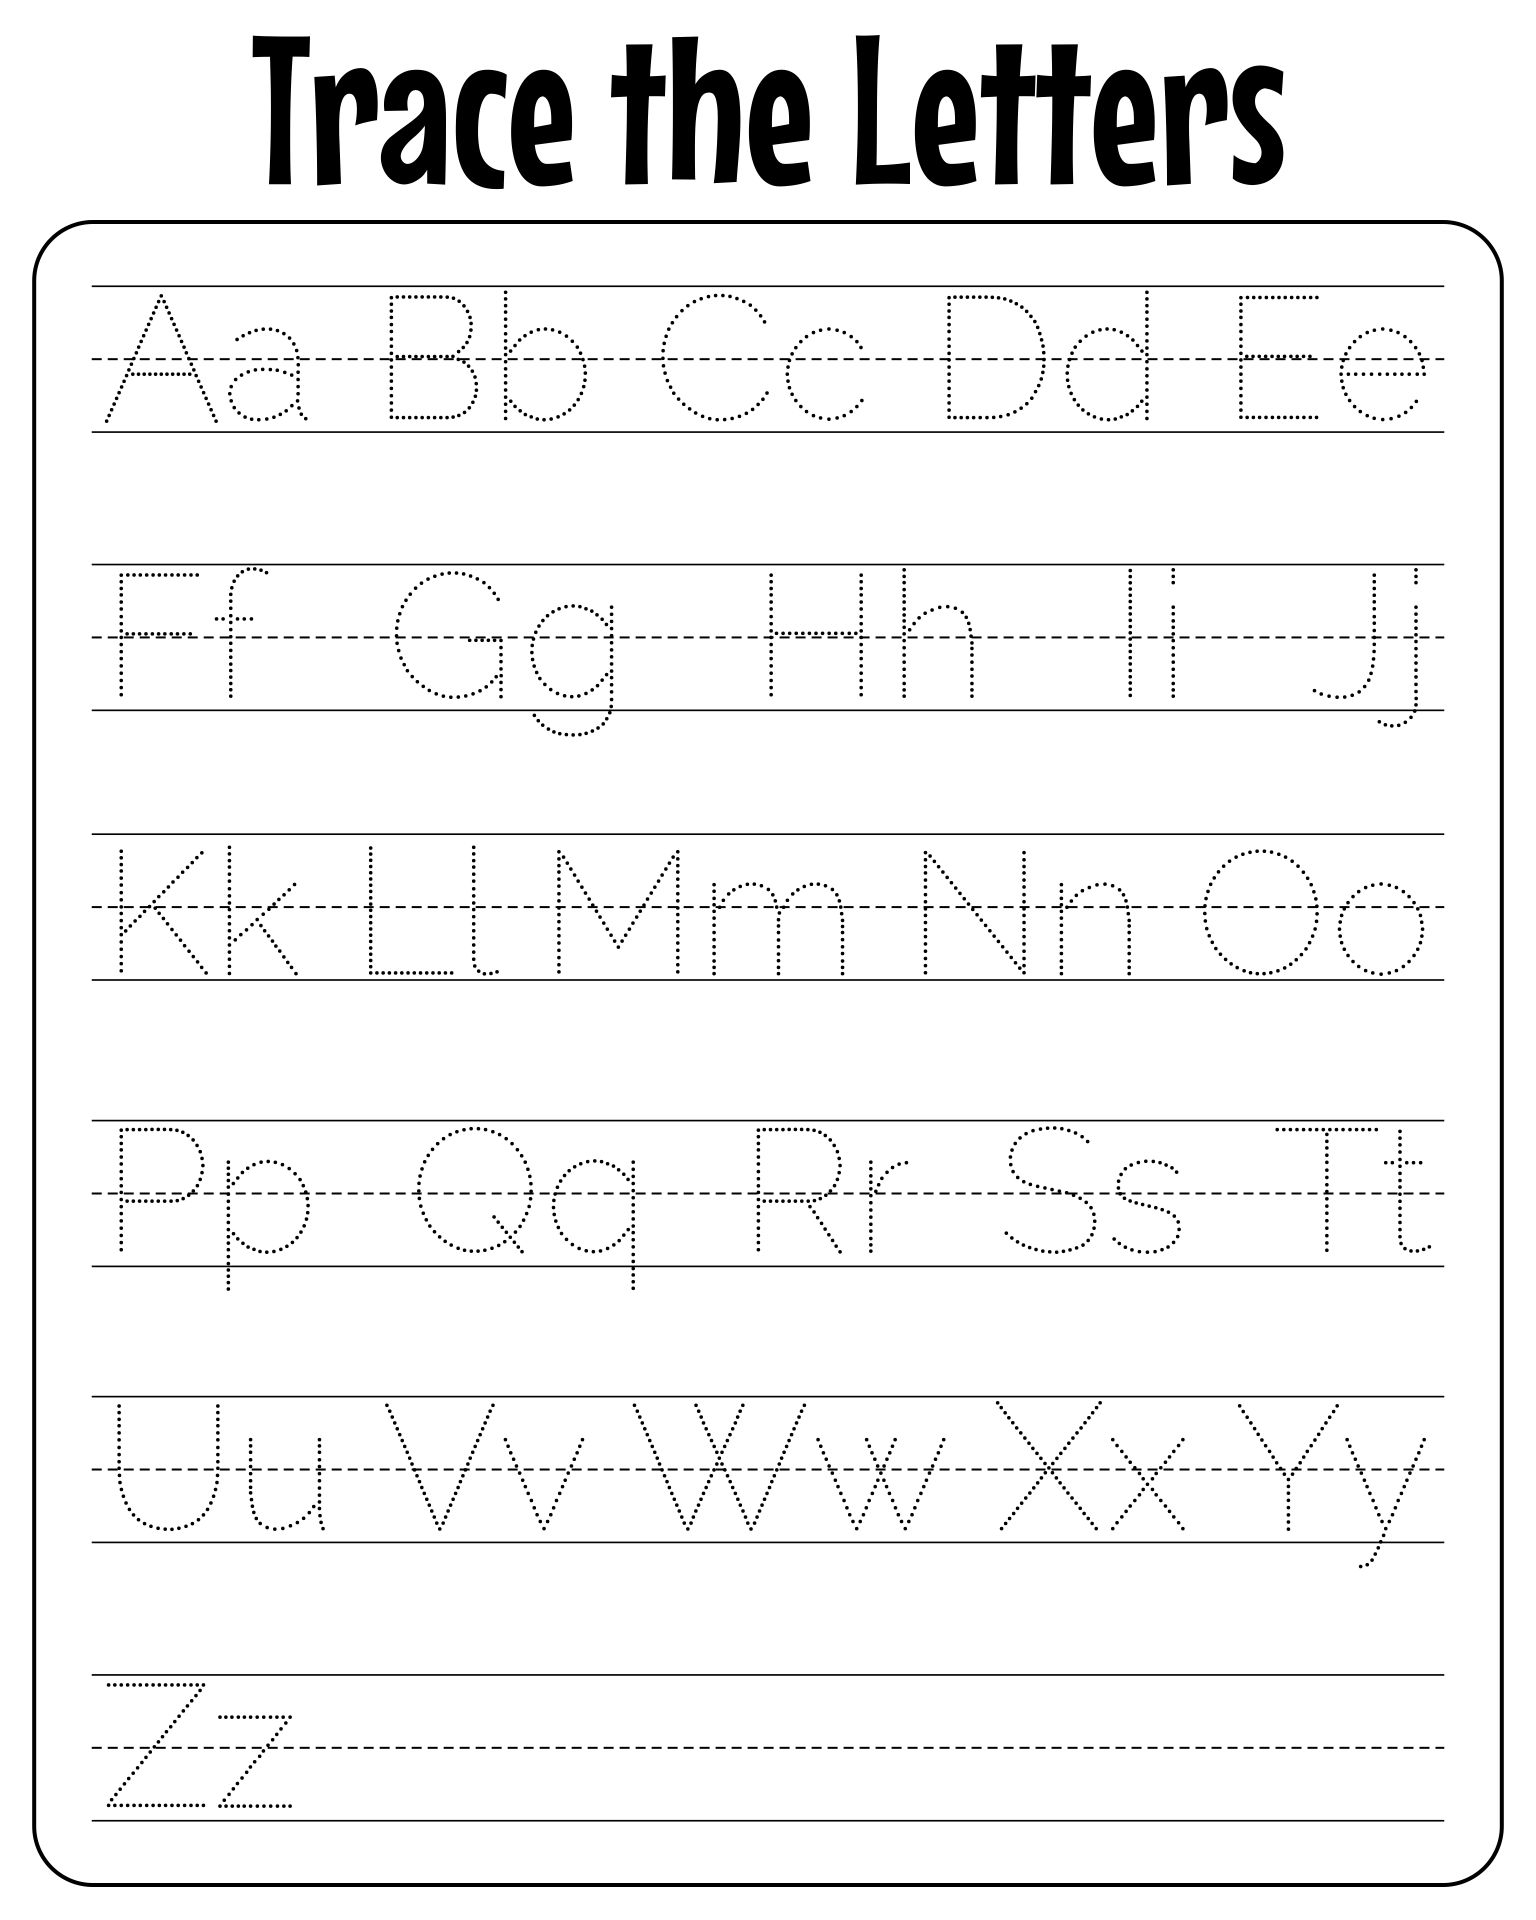 tracing-abc-letter-worksheets